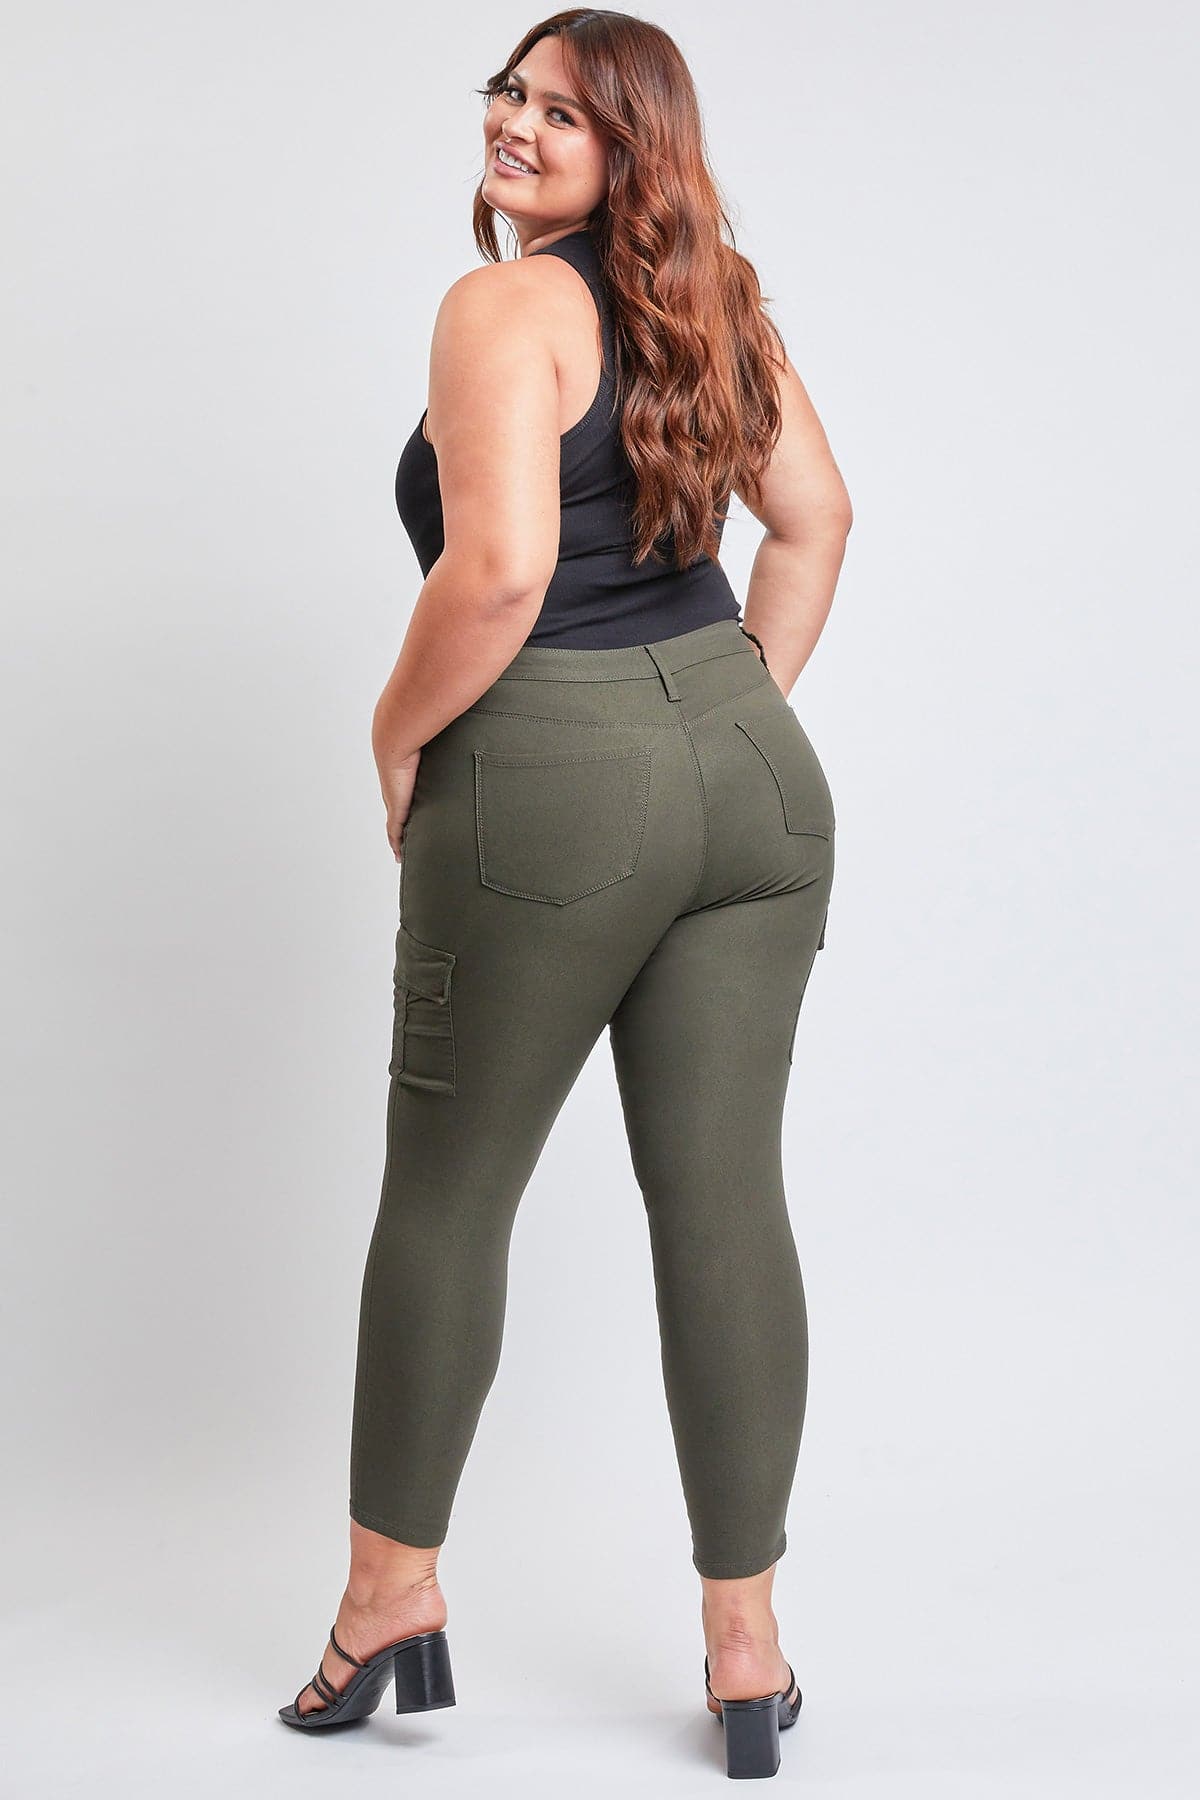 Plus Size Women's Hyperstretch Forever Color Cargo Pants